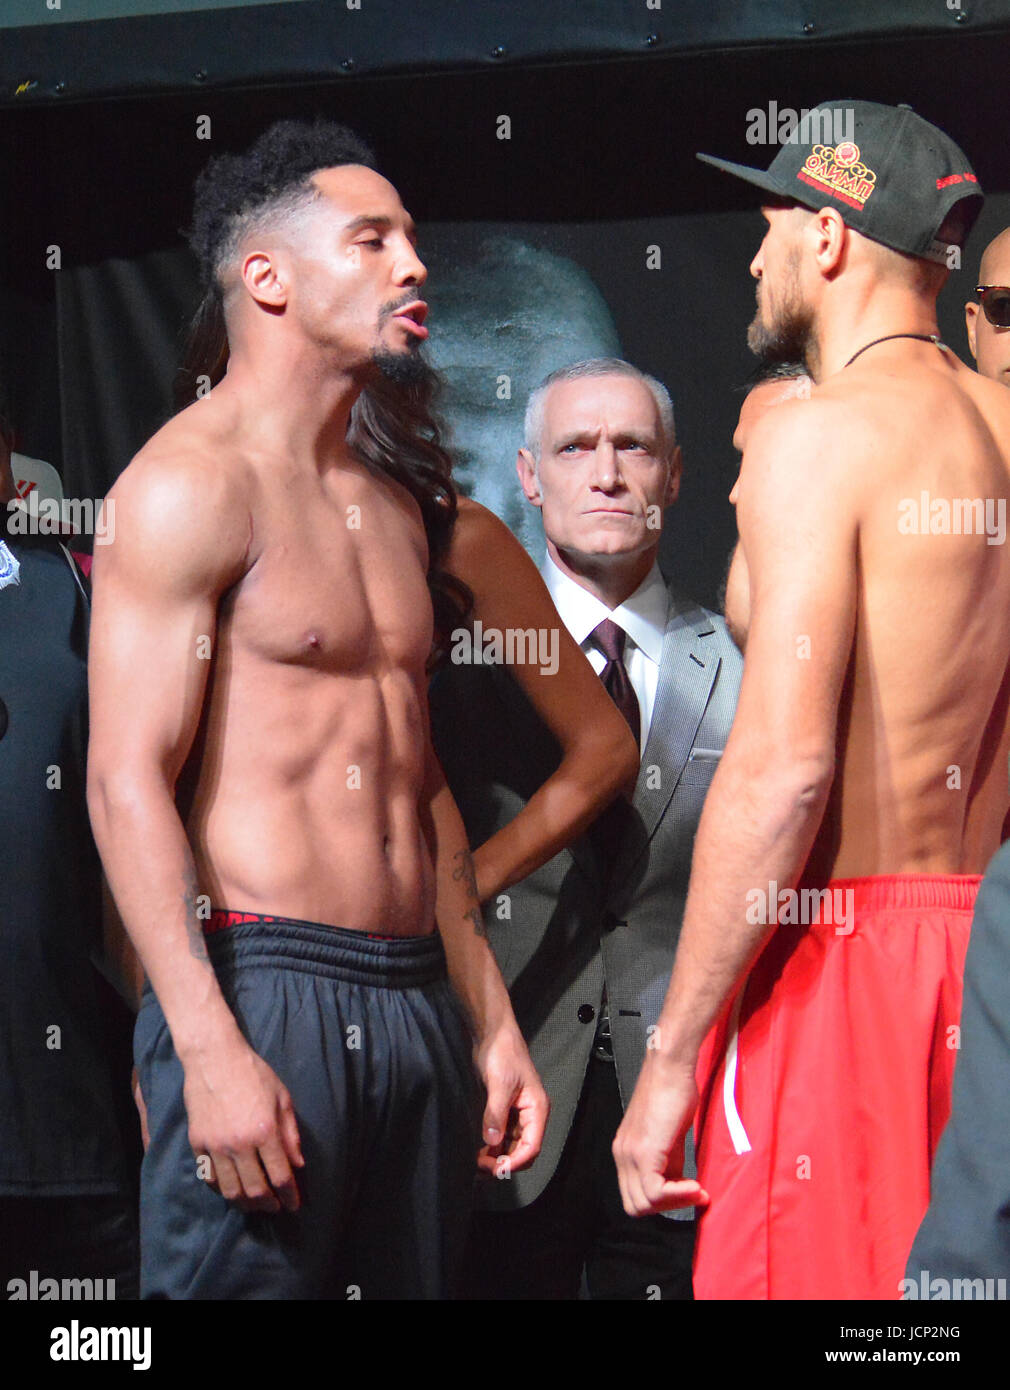 Las Vegas, Nevada, USA. 16th June, 2017. WBA, WBC and IBF Light Heavyweight Boxing World Champion Andre Ward and challenger Sergey Kovalev attend the weigh-in ceremony on June 16, 2017 at Mandaly Bay Events center for their upcoming rematch in Las Vegas, Nevada. Credit: Marcel Thomas/ZUMA Wire/Alamy Live News Stock Photo